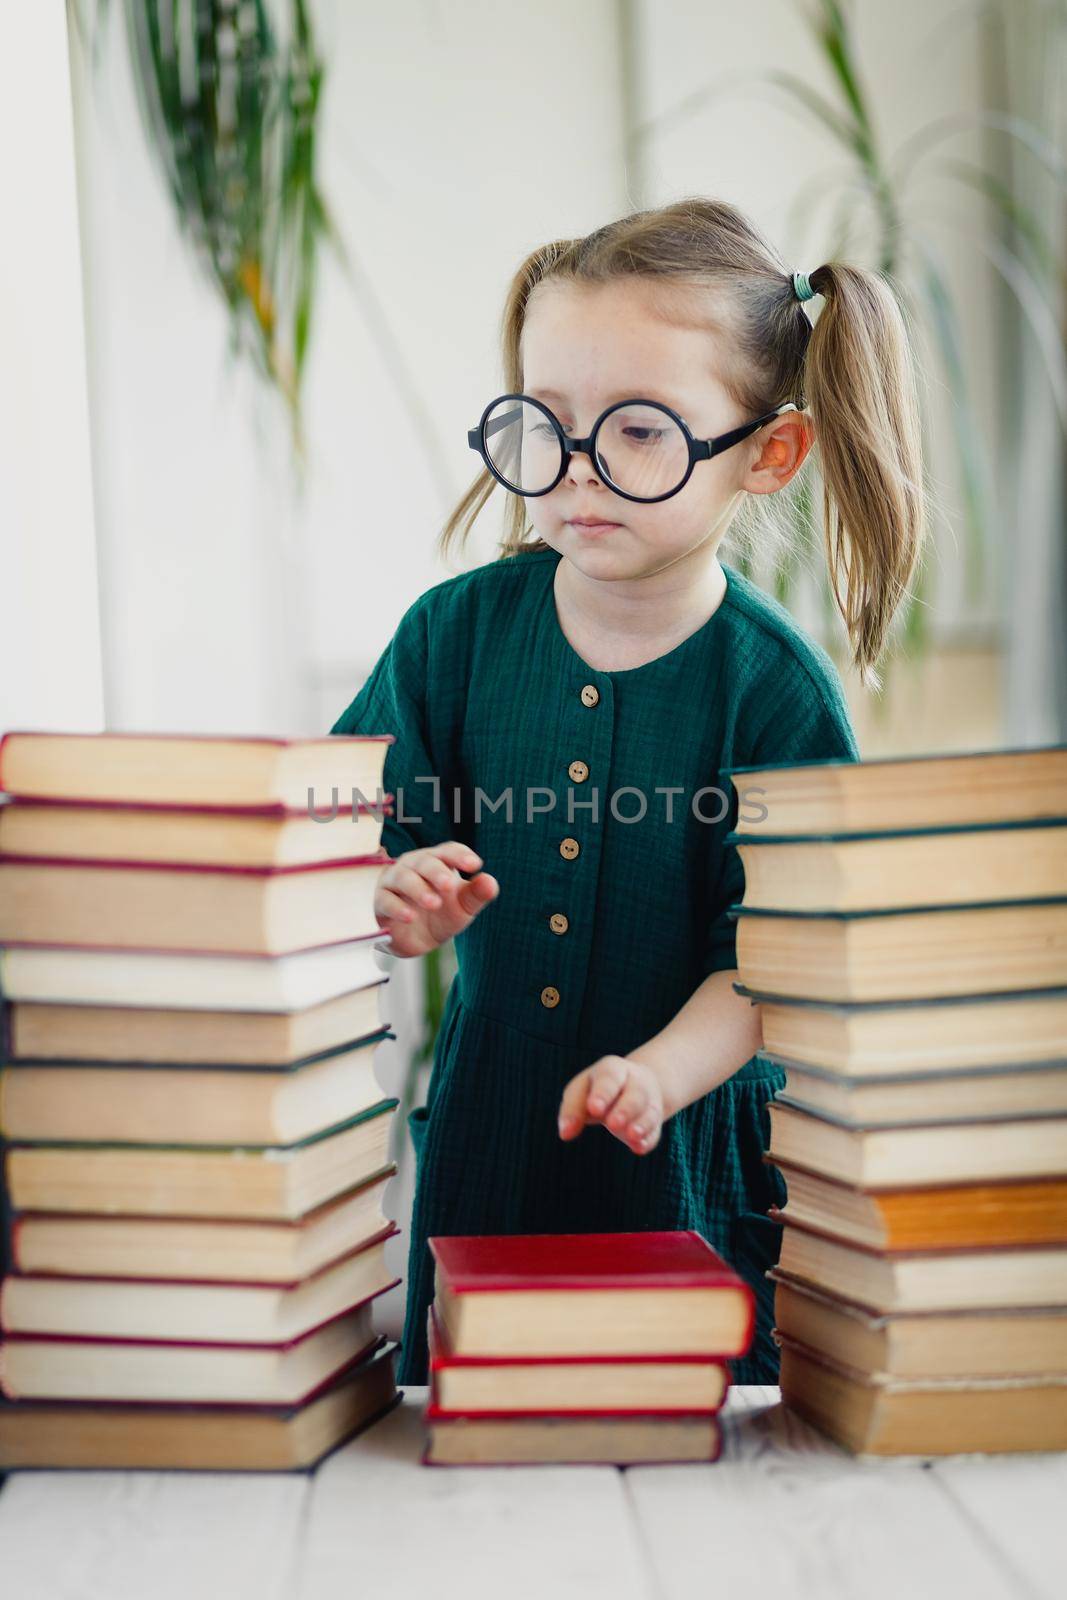 Cute little girl in round shaped glasses and green muslin dress folds colorful books in order.